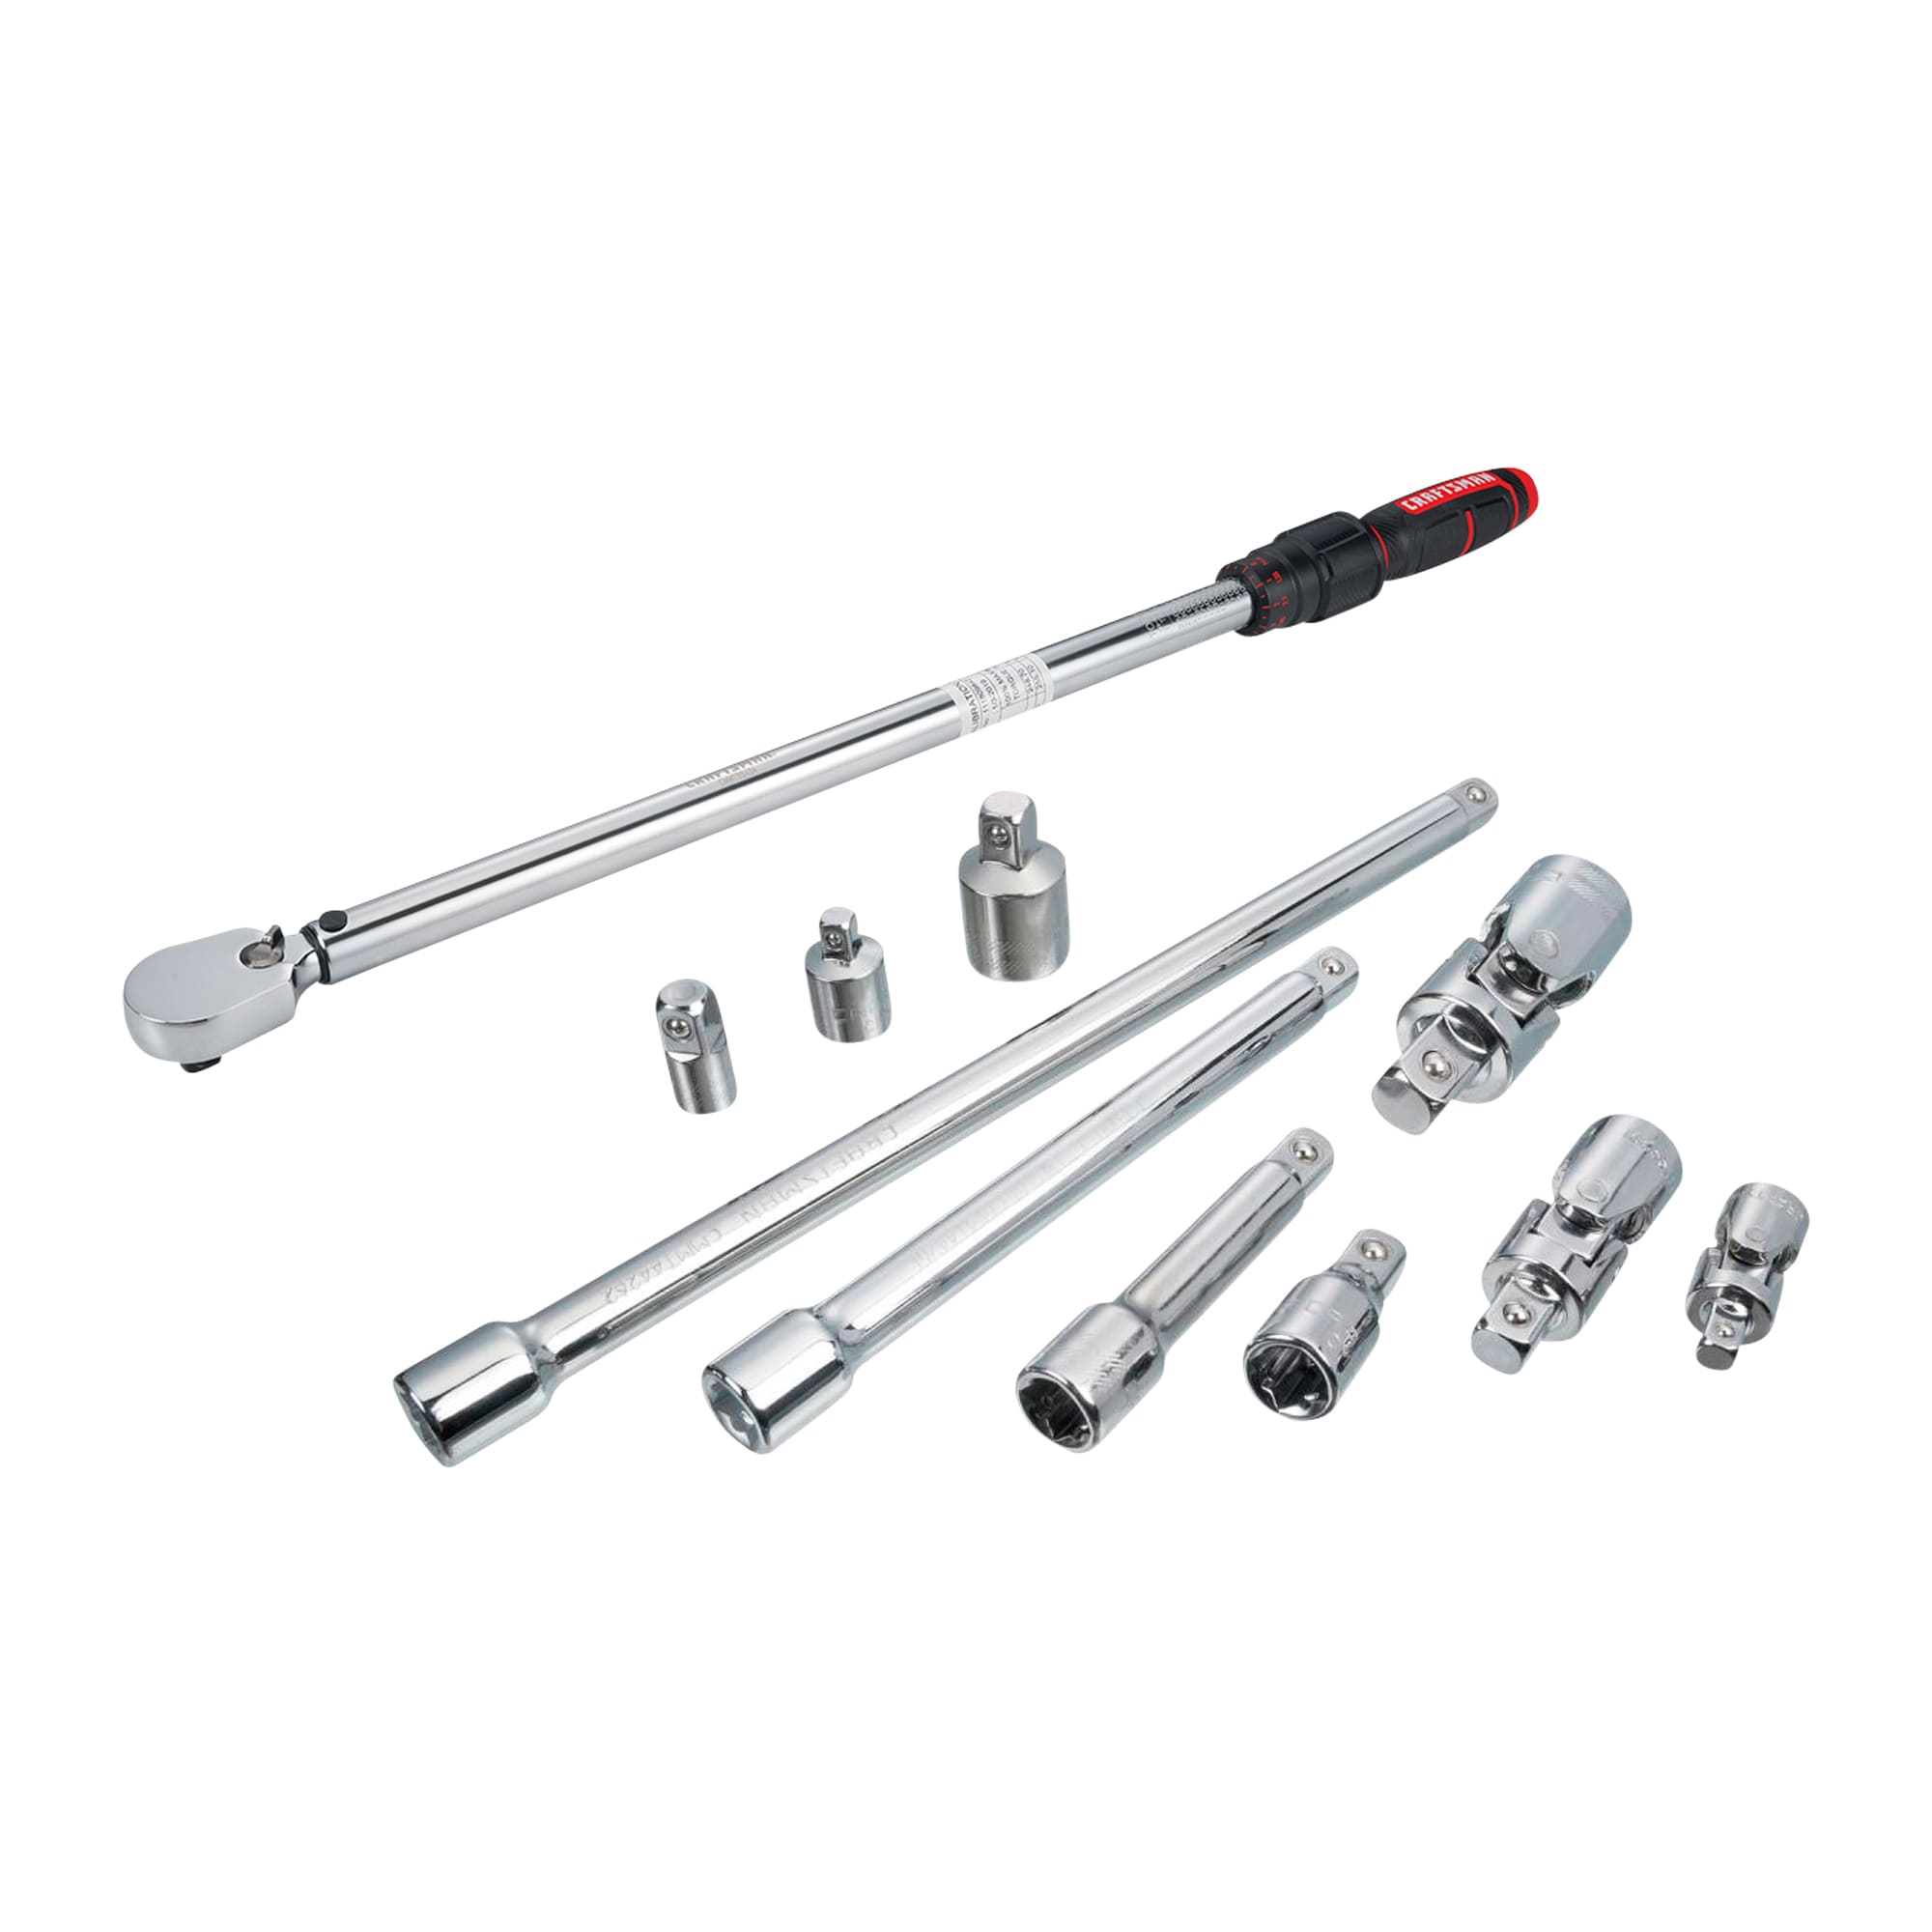 Shop CRAFTSMAN 10-Piece Multi-drive Accessory Set & 1/2-in Drive Click Torque  Wrench (50-ft lb to 250-ft lb) at